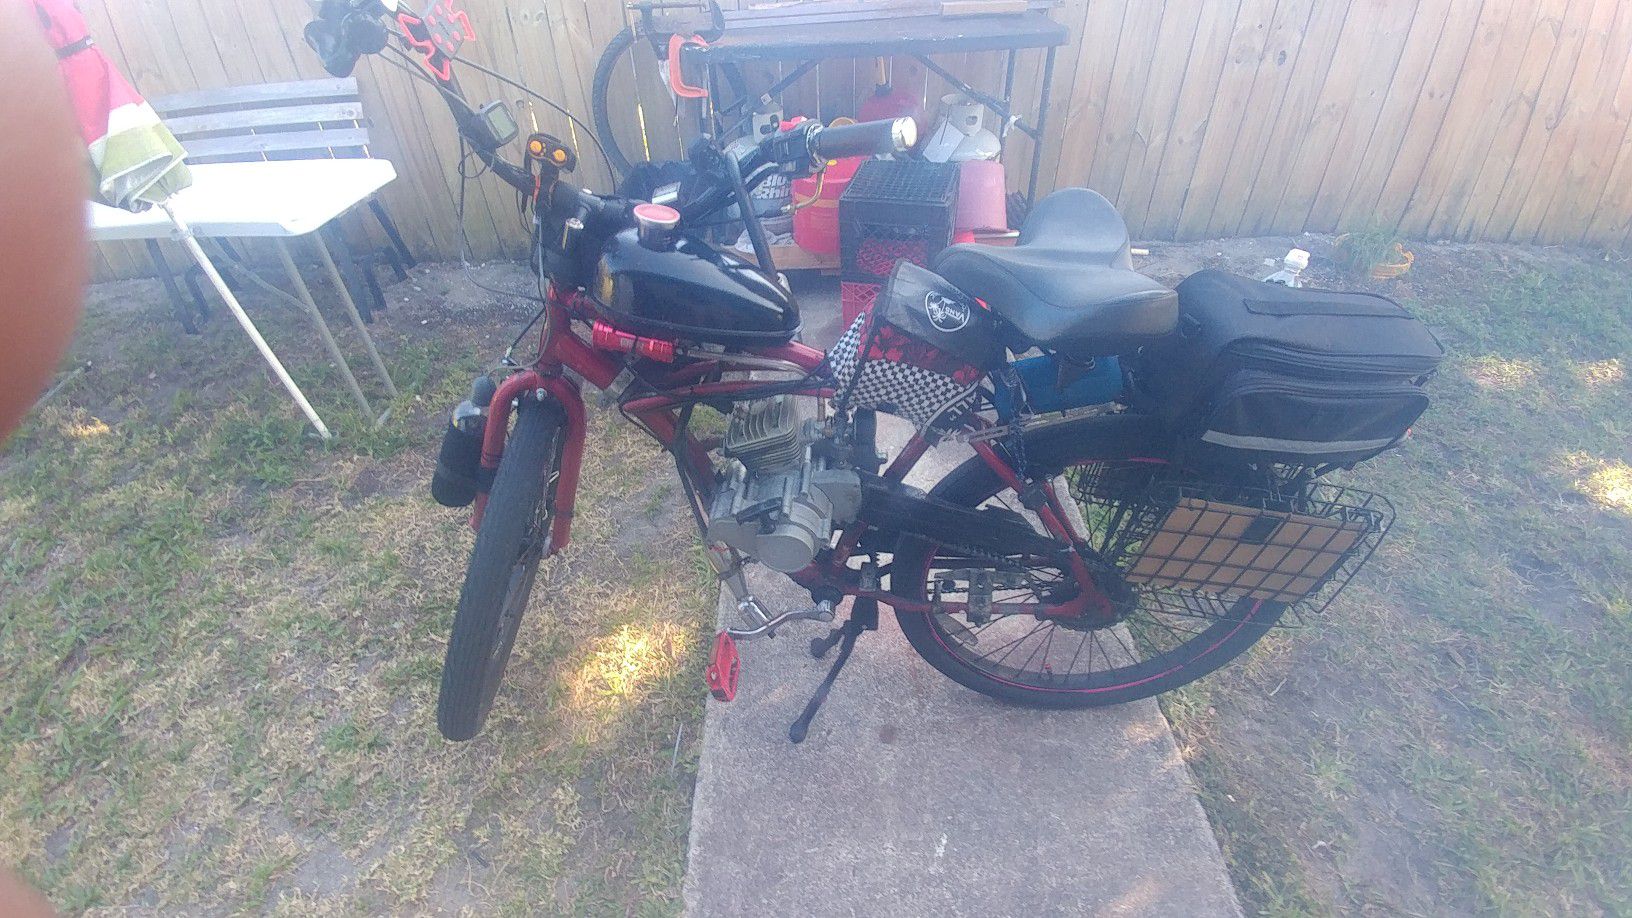 Newly repaired motorized bicycle